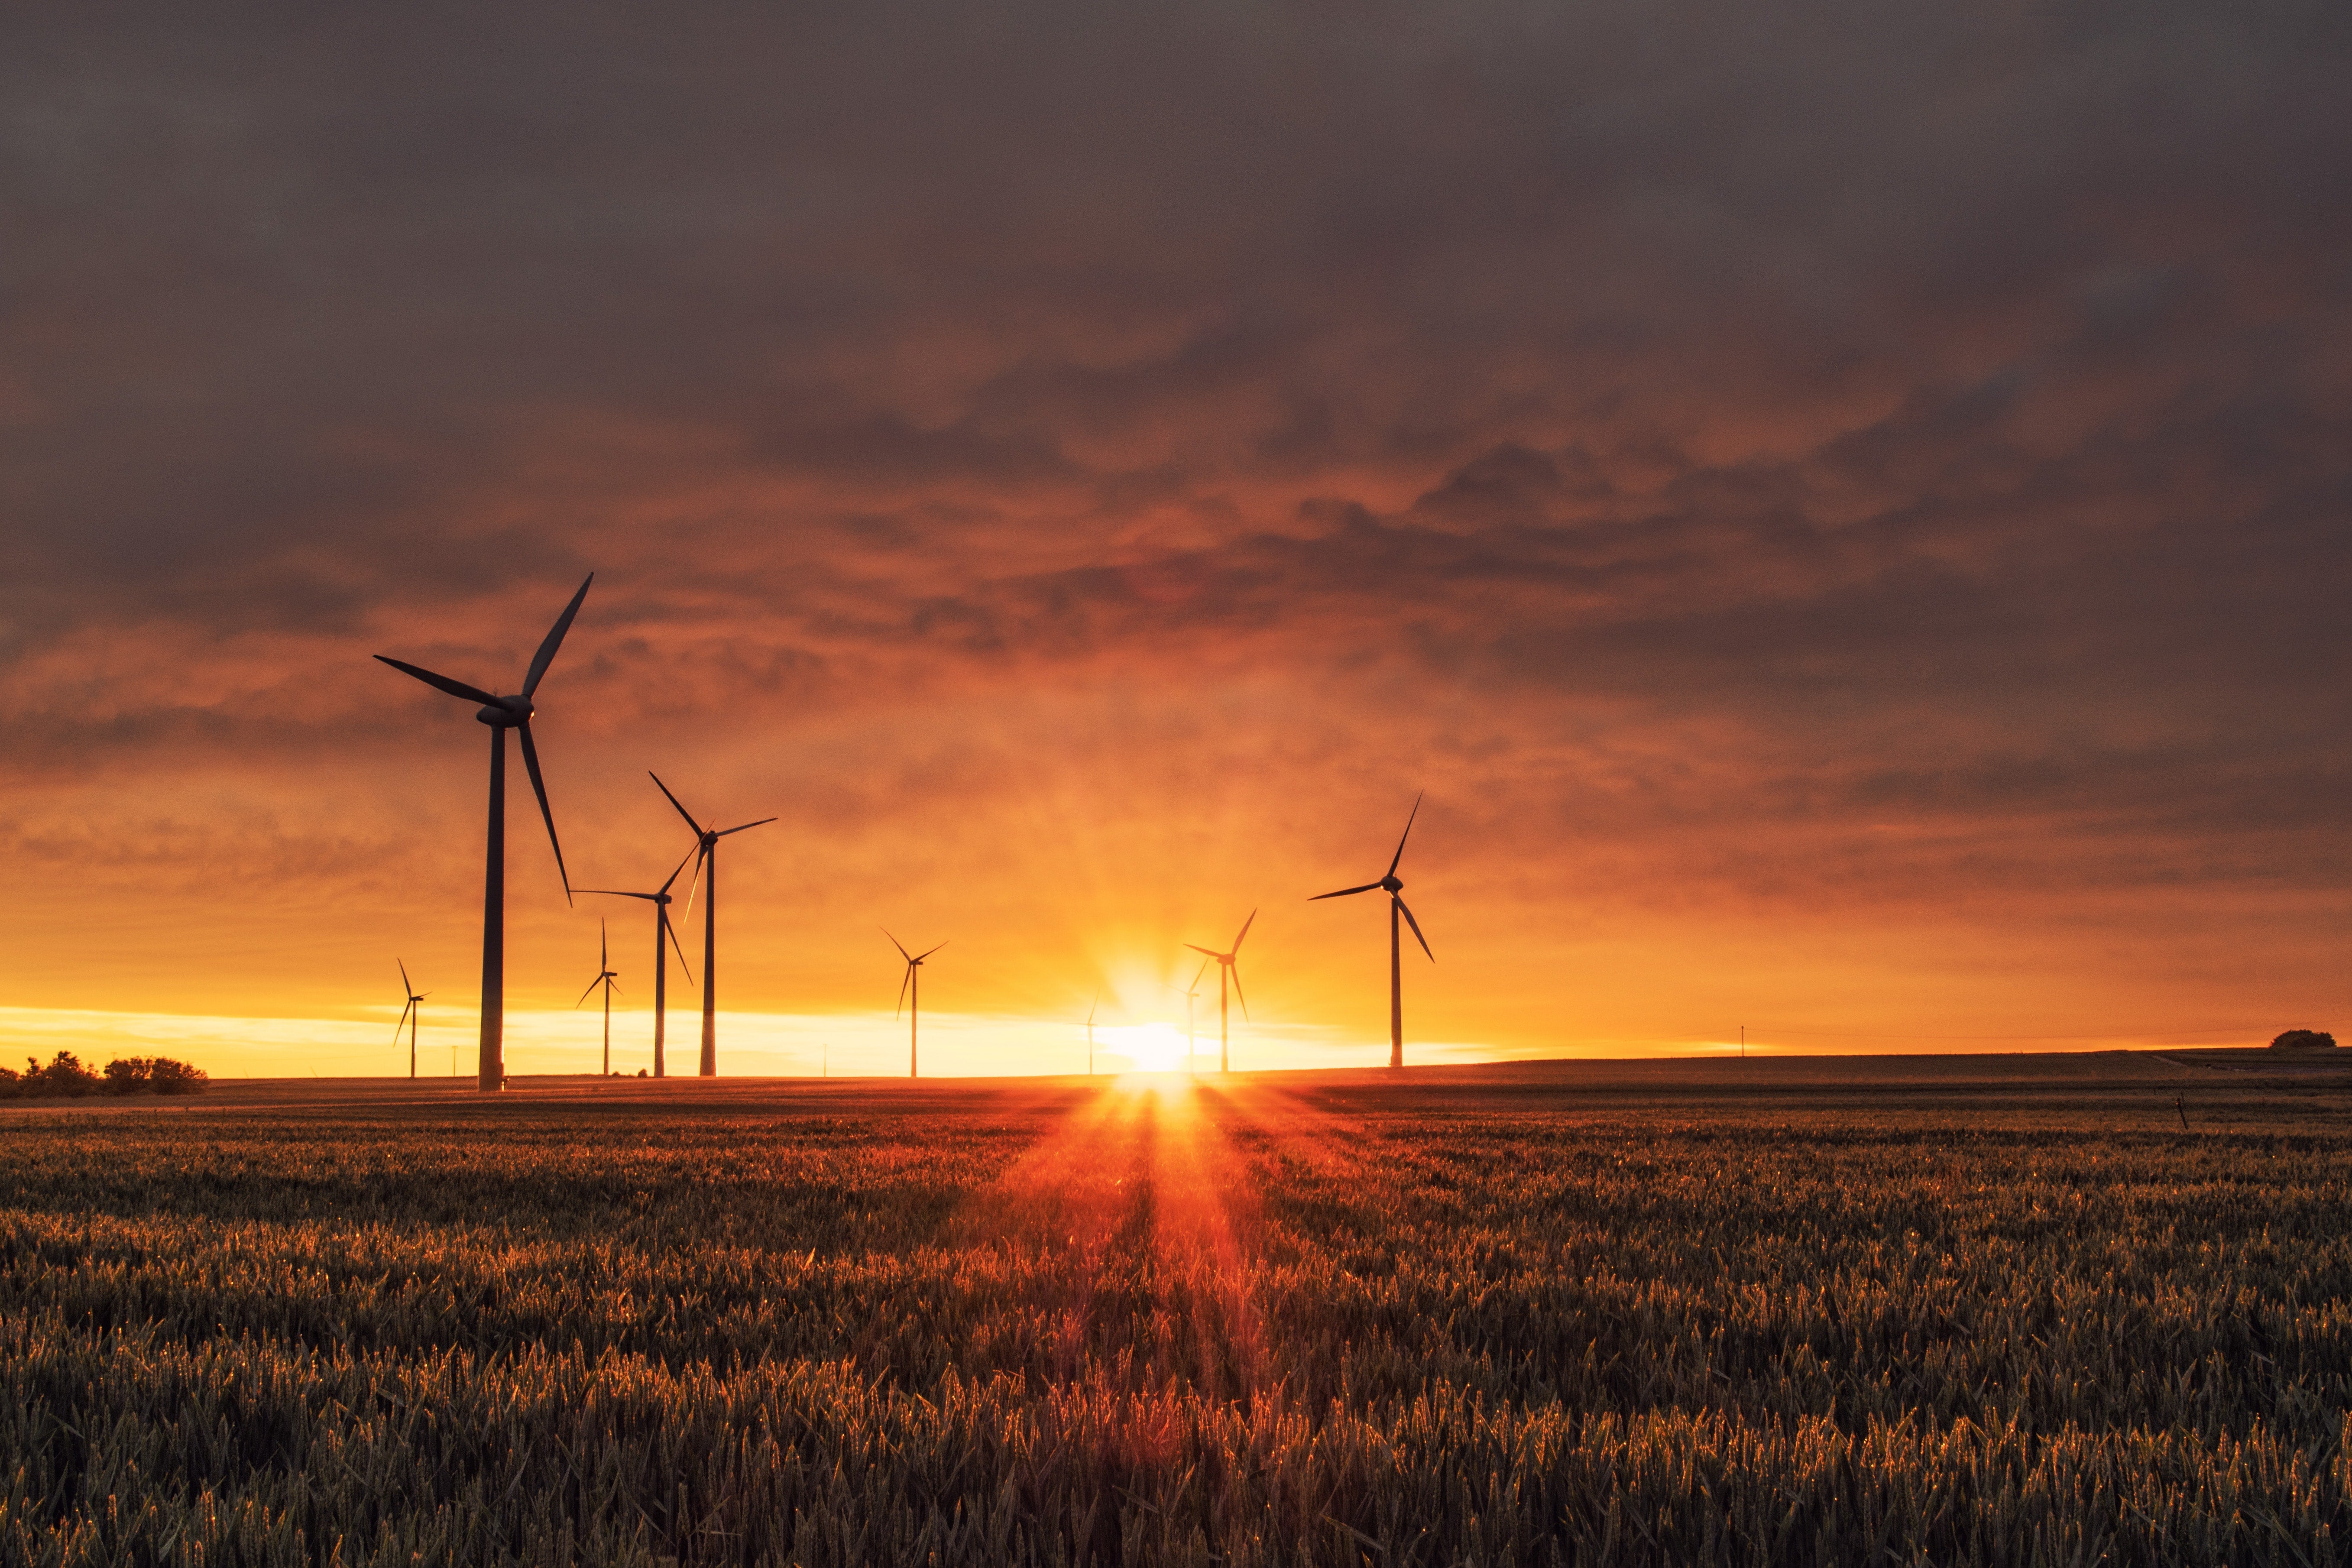 Wind turbines on a field against a sunrise or sunset.